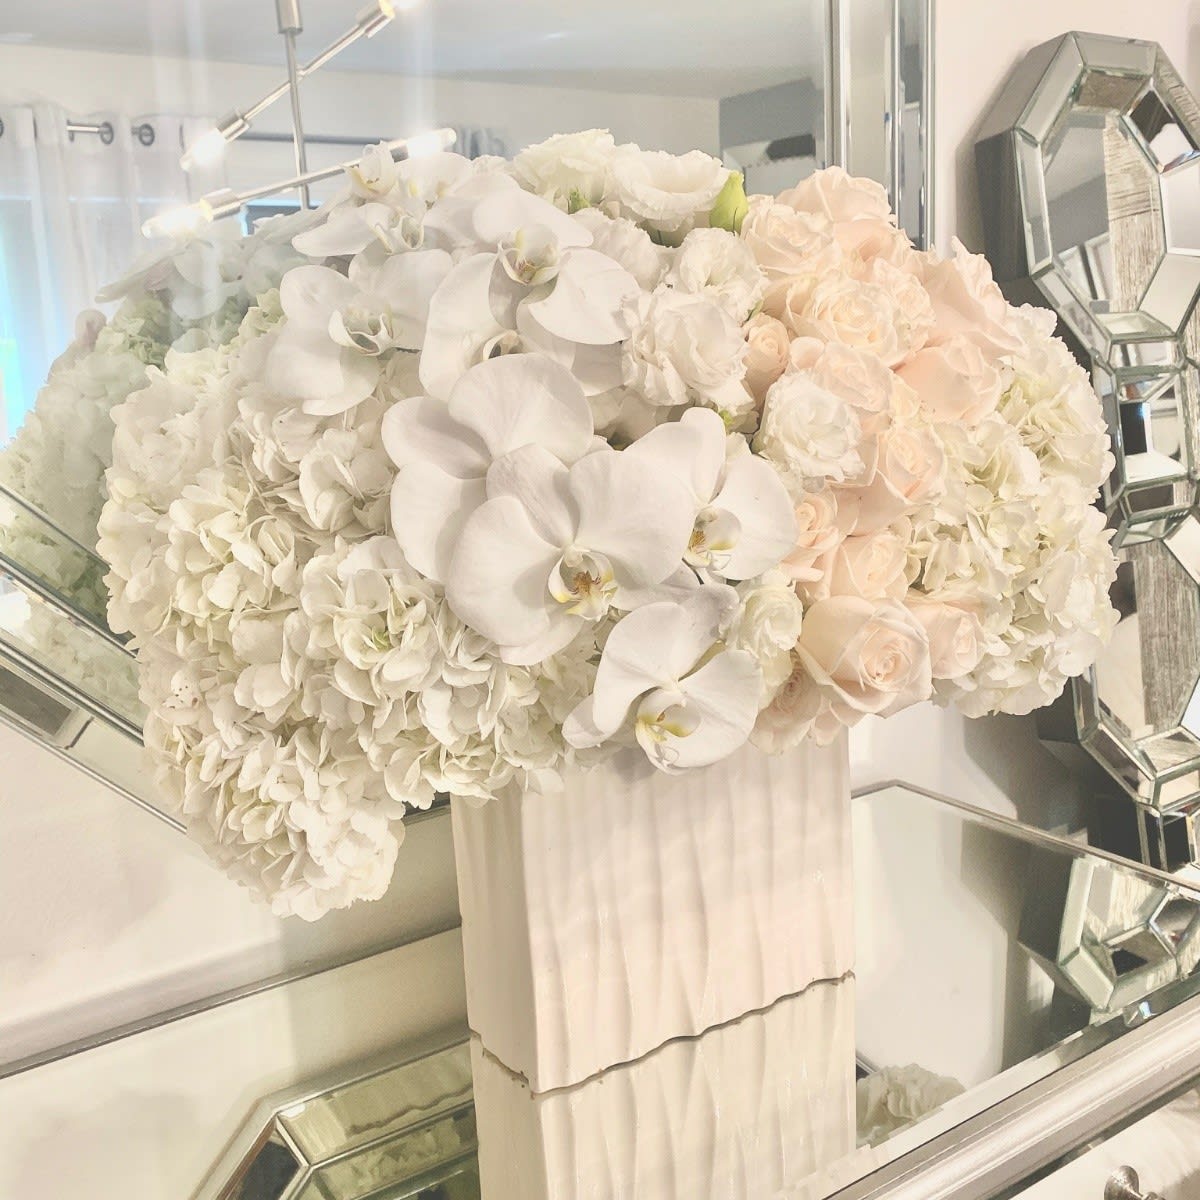 Pave Paris! - White orchids roses and hydrangea